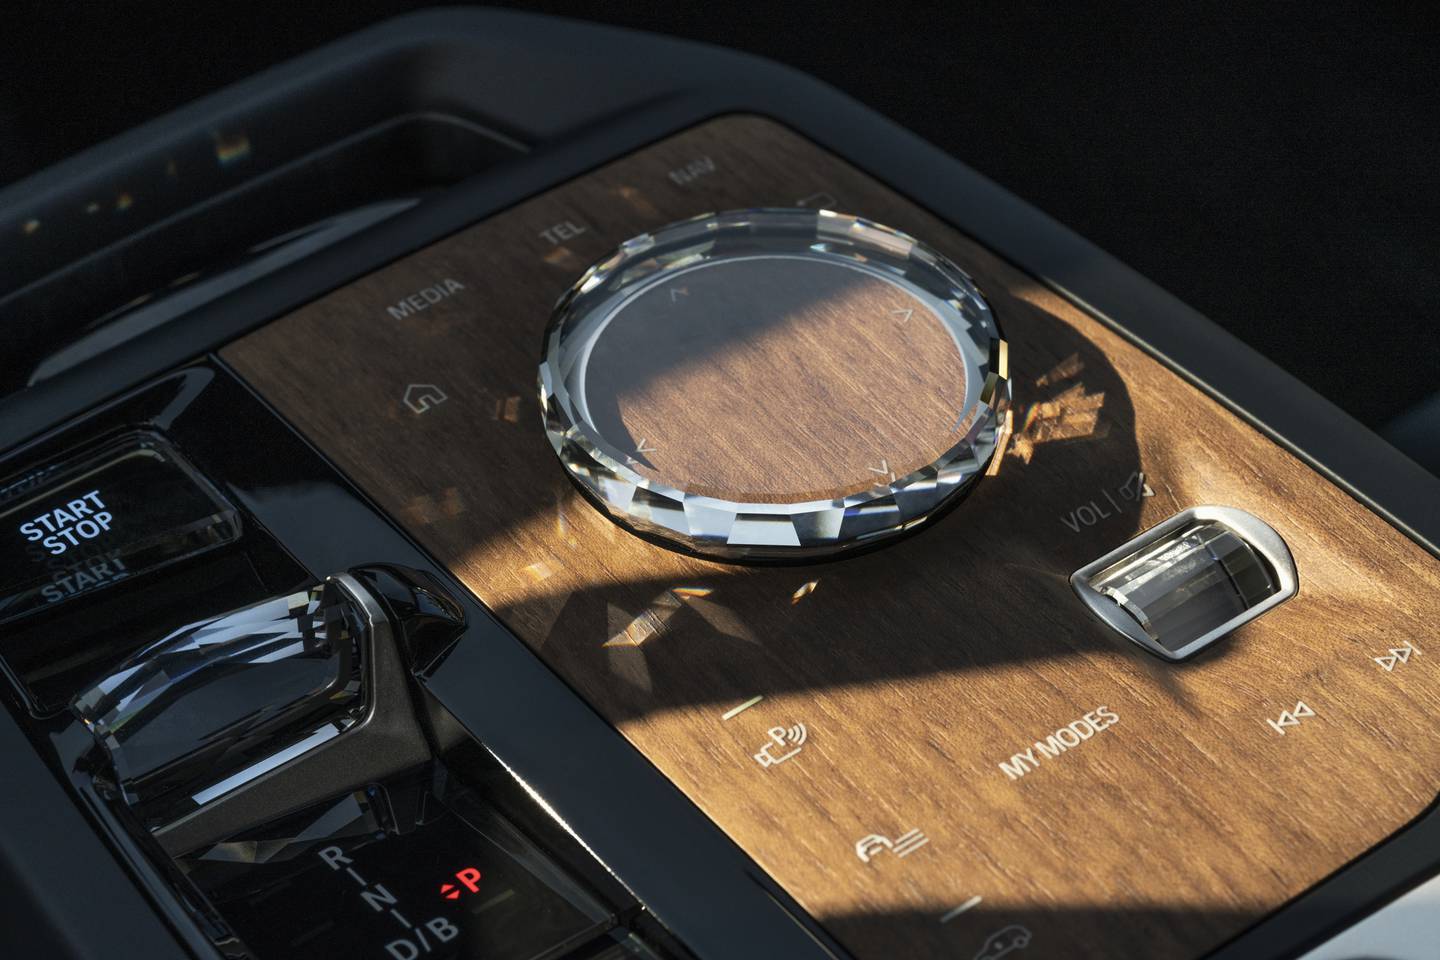 The iX M60 comes with a chintzy crystal iDrive twist dial, gear selector switch and seat adjustment buttons.